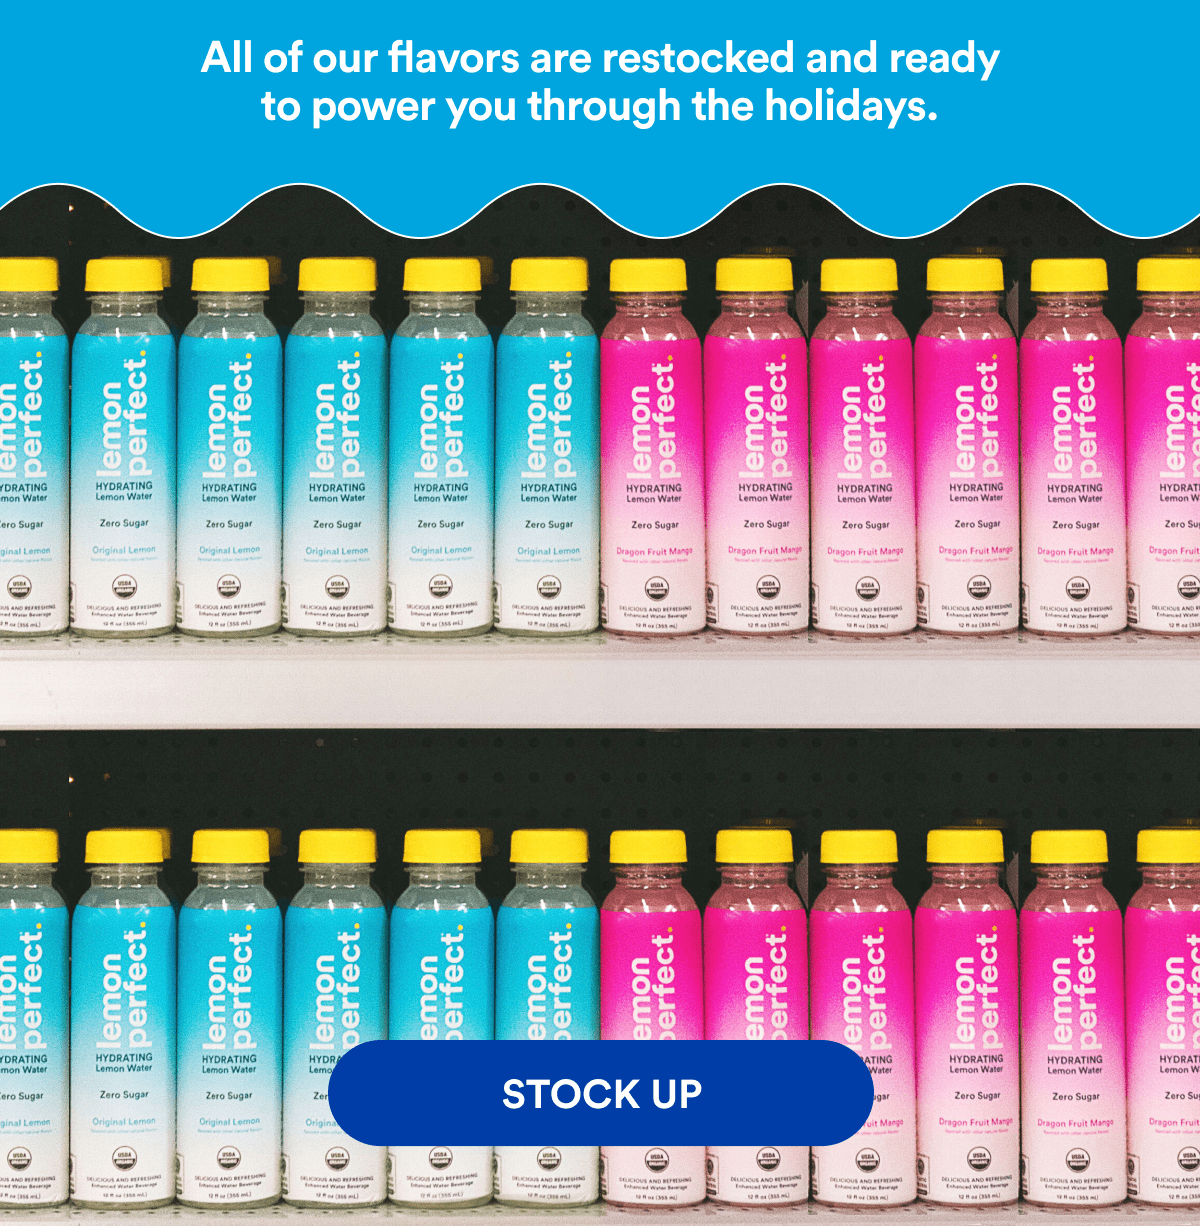 All of our flavors are restocked and ready to power you through the holidays. | STOCK UP